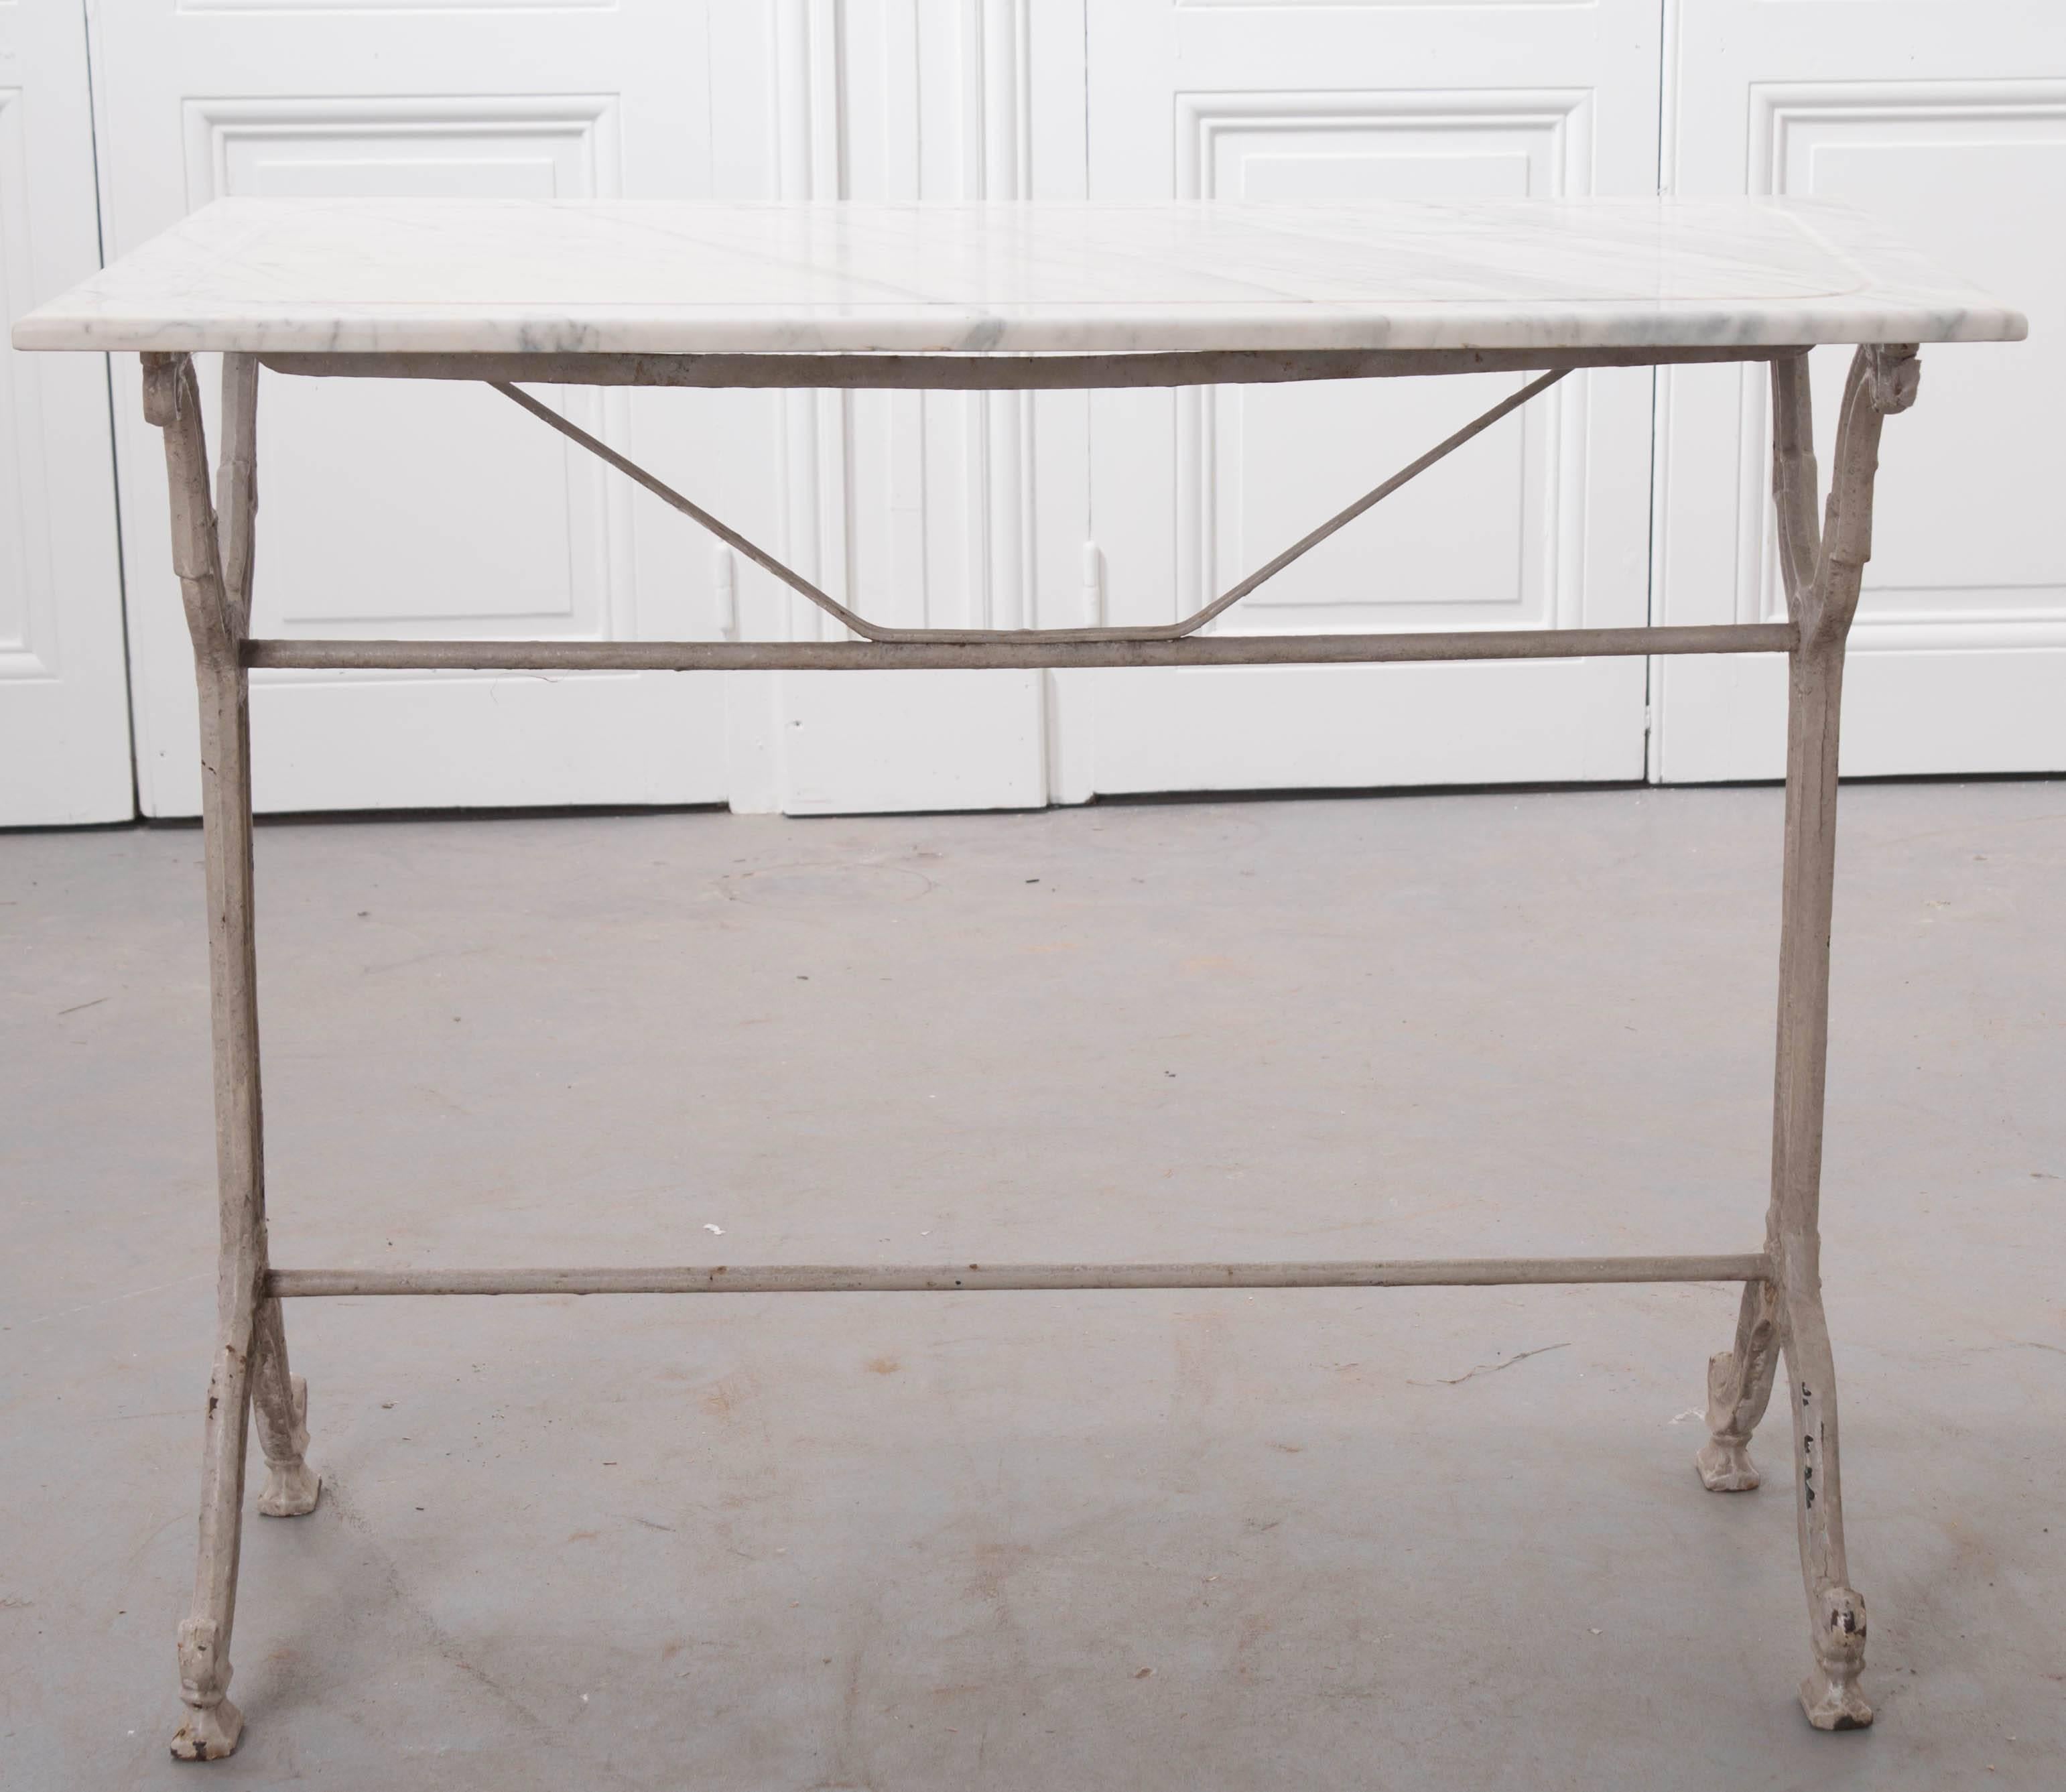 This marvellous marble top bistro or garden table was made in France towards the end of the 19th century. The white marble top is antique and in excellent condition with no blemishes and soft grey veins throughout. The top also features a perimeter